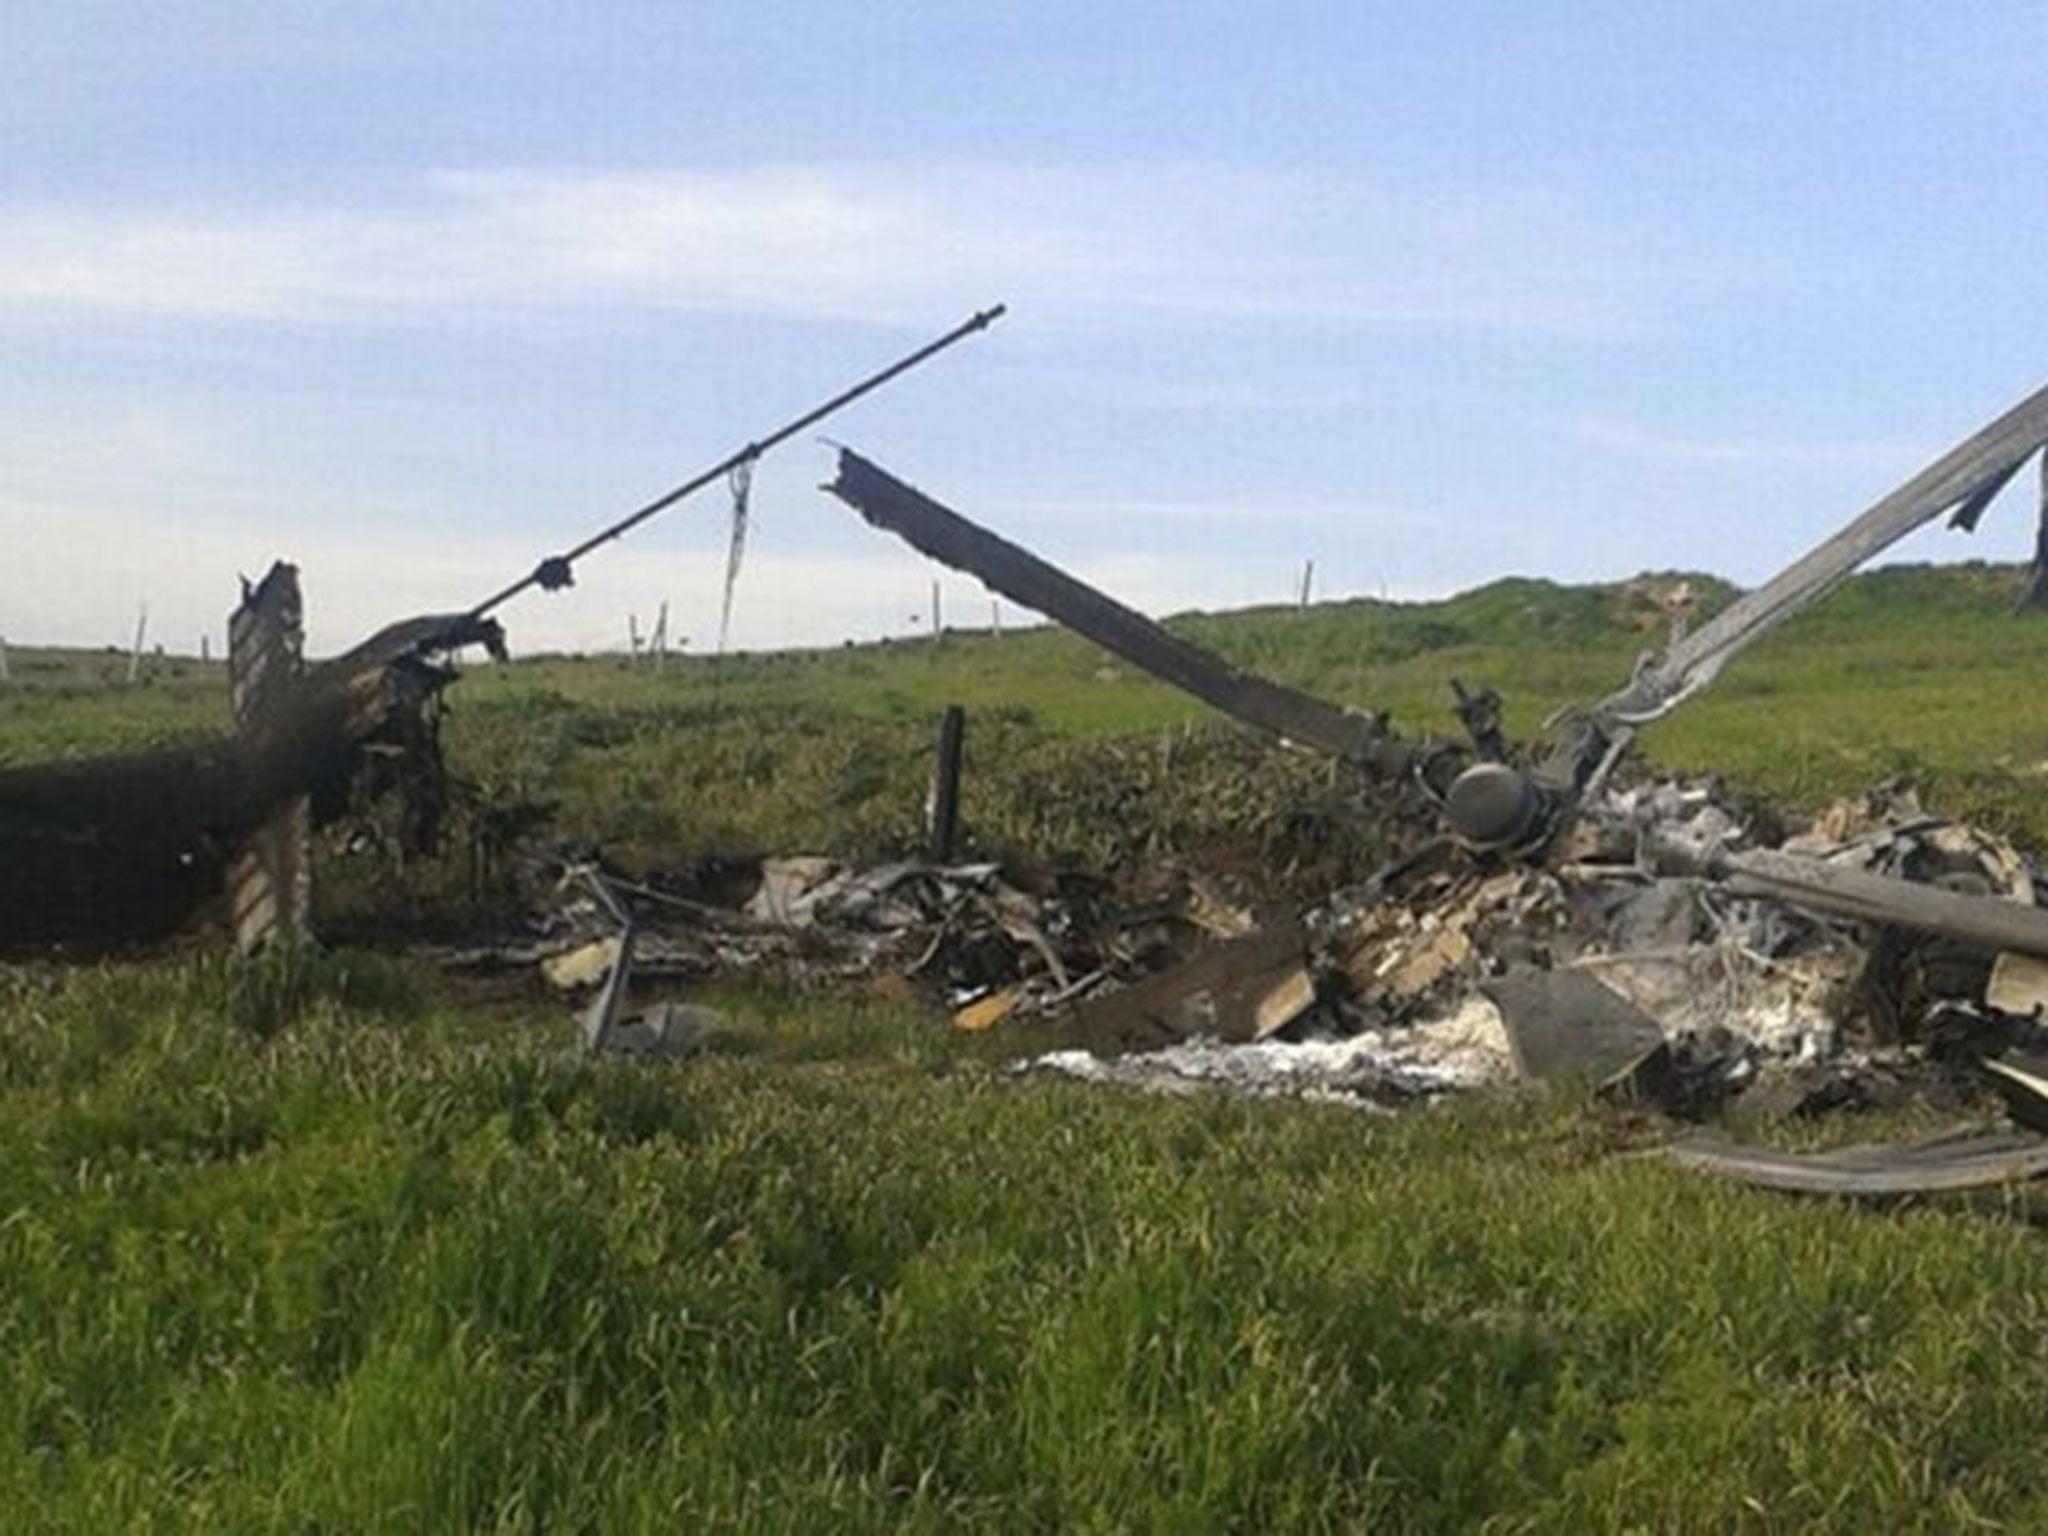 Remains of a downed Azerbaijani forces helicopter lies in a field in the separatist Nagorno-Karabakh region, on Saturday, 2 April, 2016